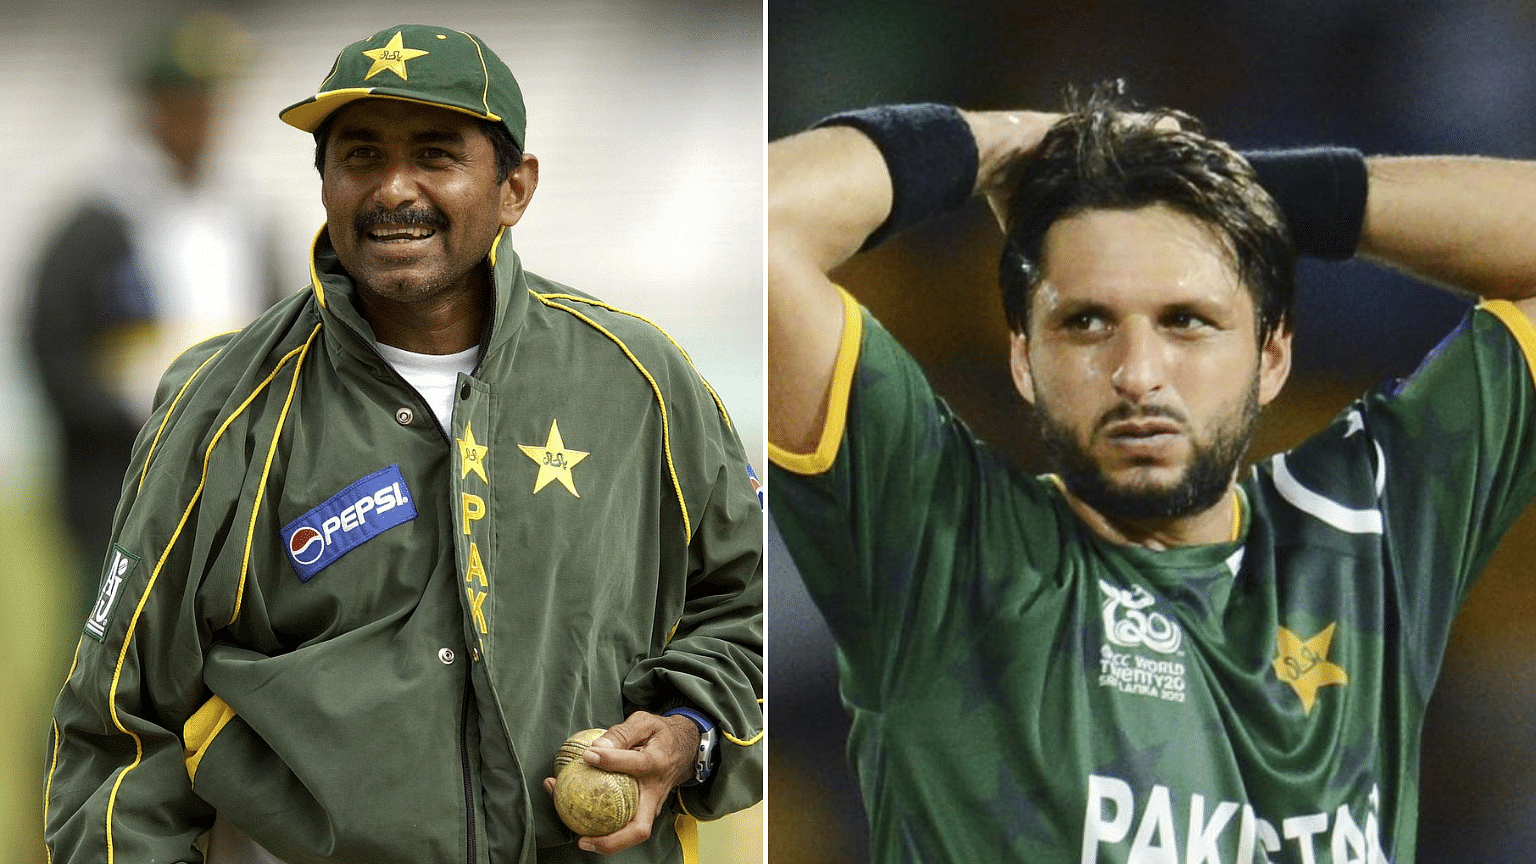 In his book, Afridi described the former captain Miandad as a small human being.